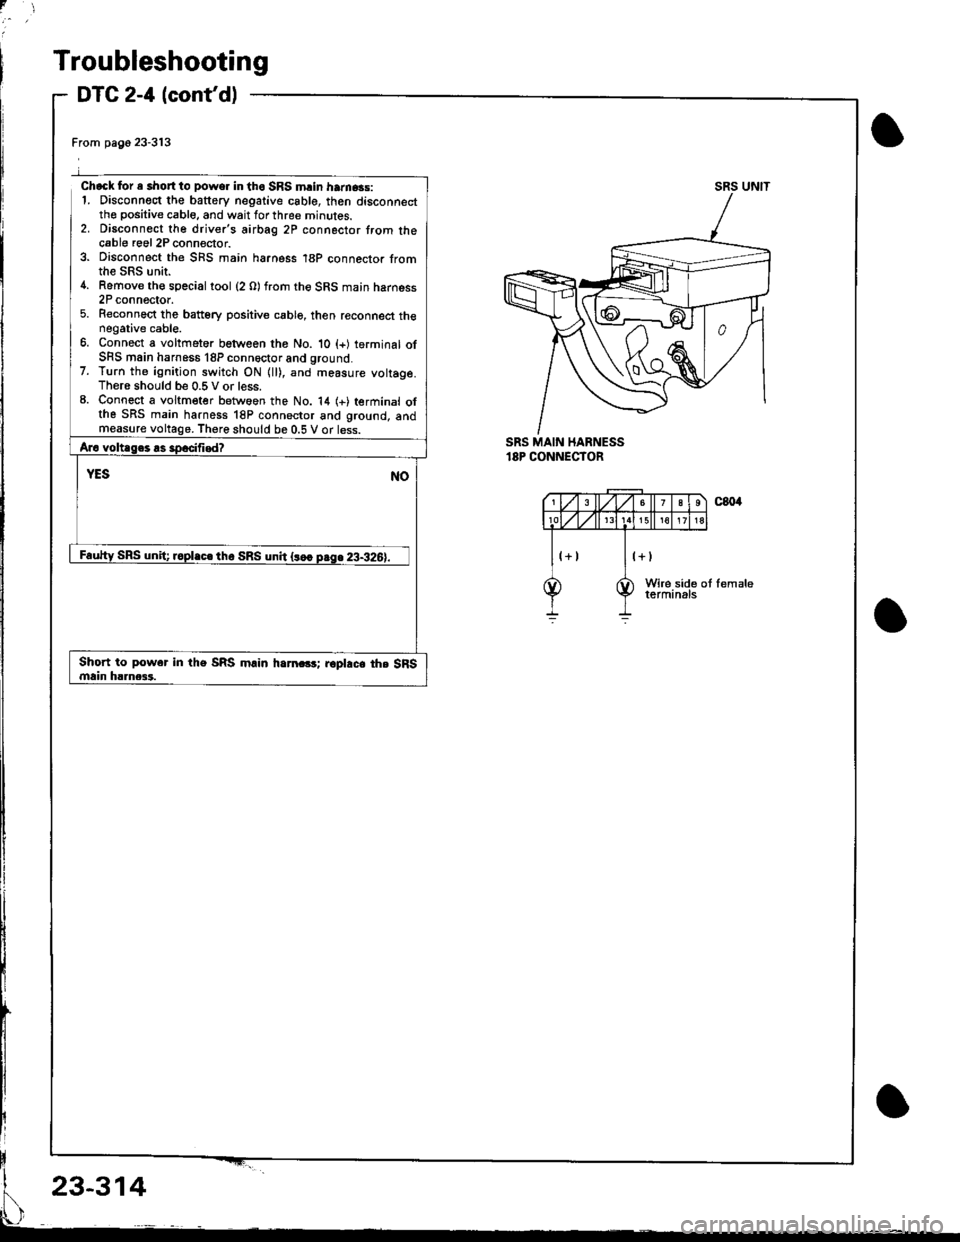 HONDA INTEGRA 1998 4.G Workshop Manual Troubleshooting
DTC 2-l (contd)
From pago 23-313
Chack for e short to power in tho SRS mrin ham.3s:1. Disconnect the battery negative csble, then disconnectthe positive cable, and wait for three min